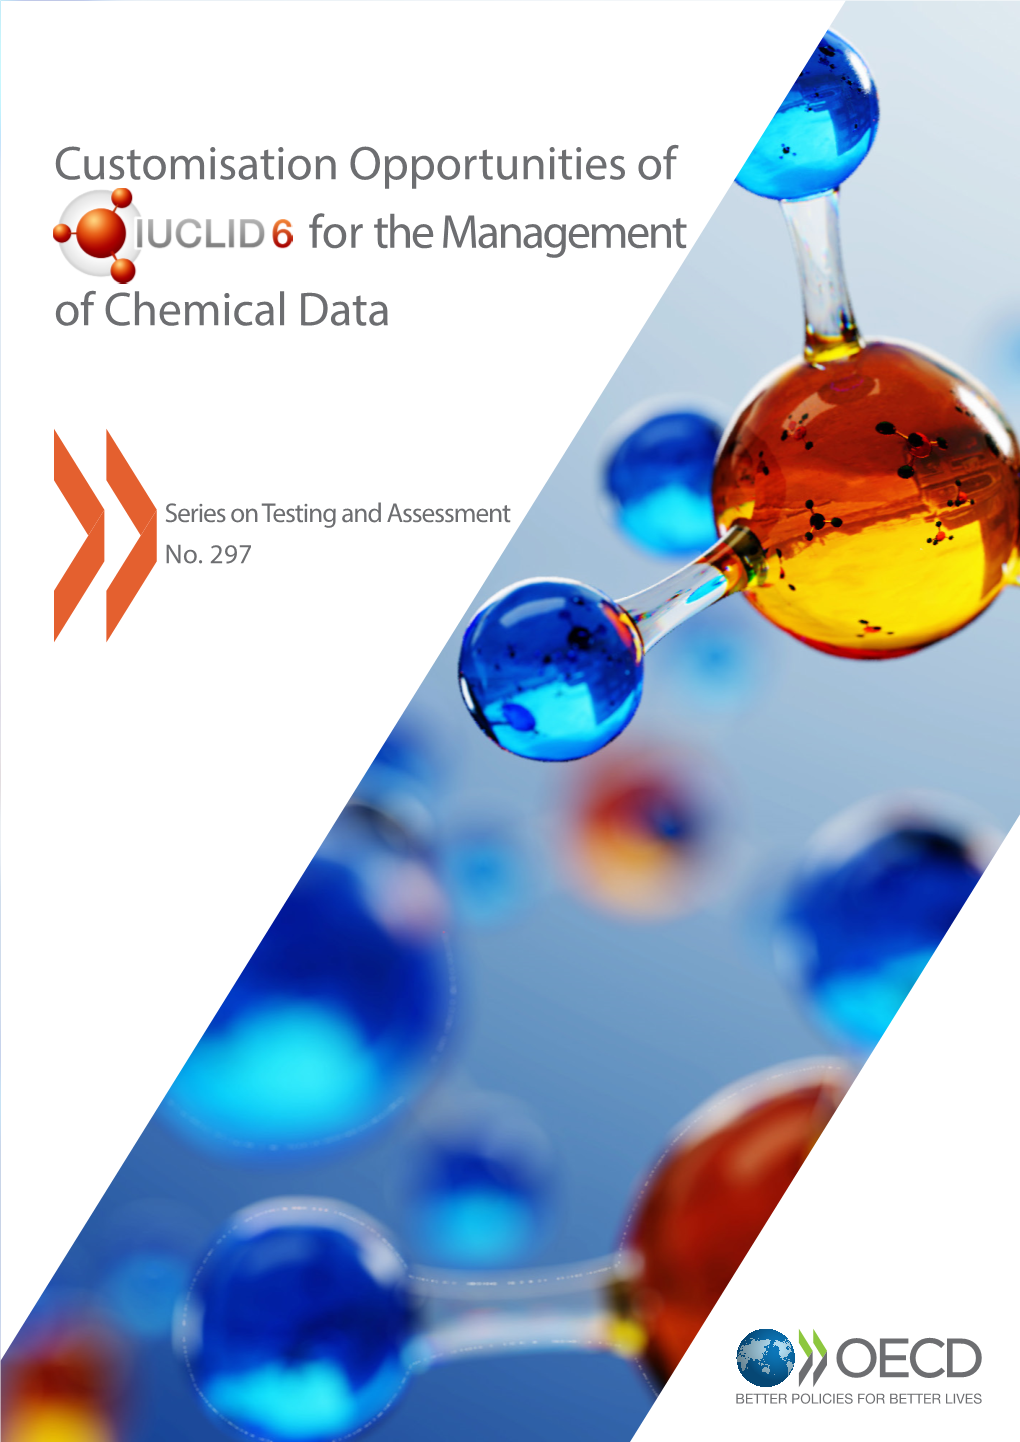 Customisation Opportunities of IUCLID for the Management of Chemical Data